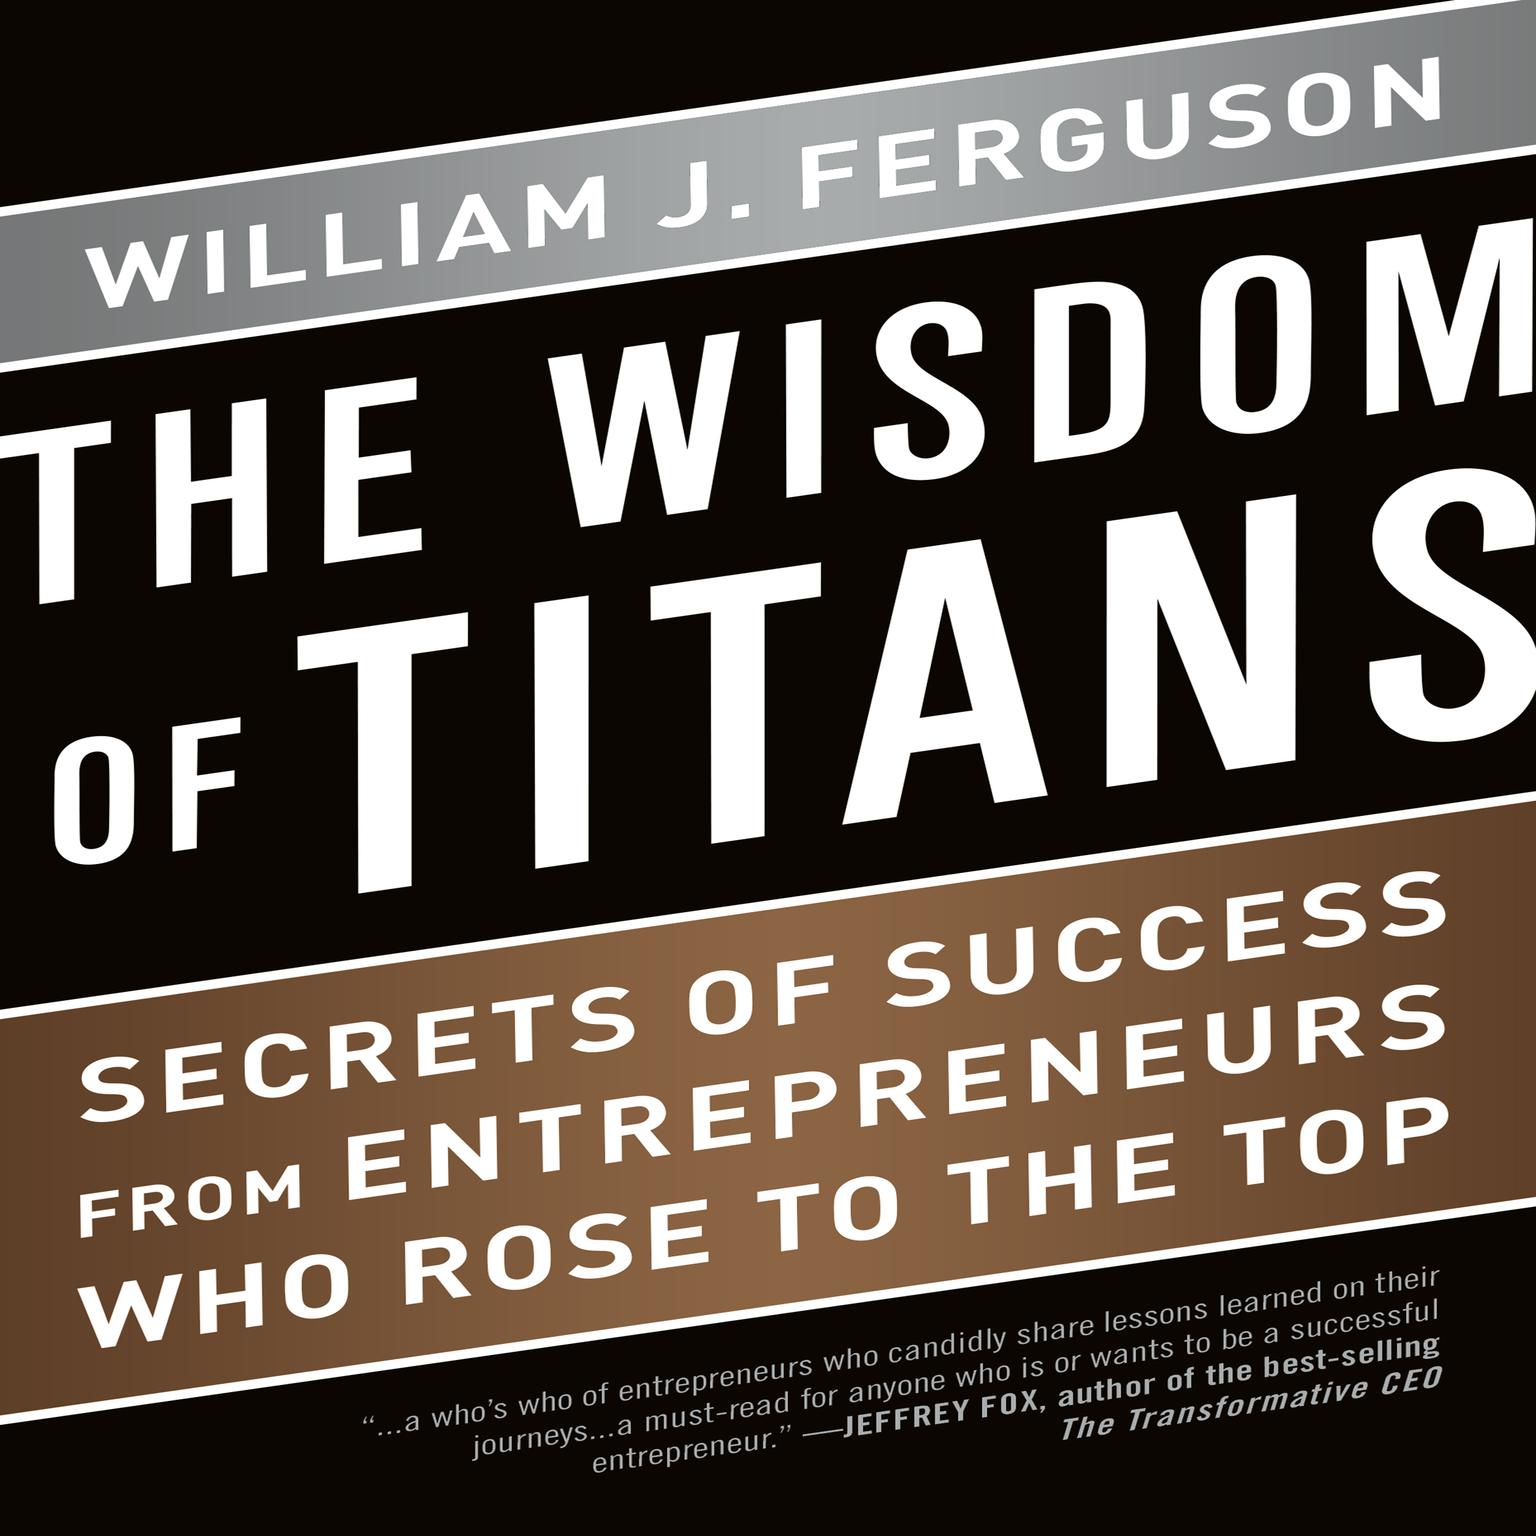 The Wisdom Titans: Secrets of Success from Entrepreneurs Who Rose to the Top Audiobook, by William J. Ferguson